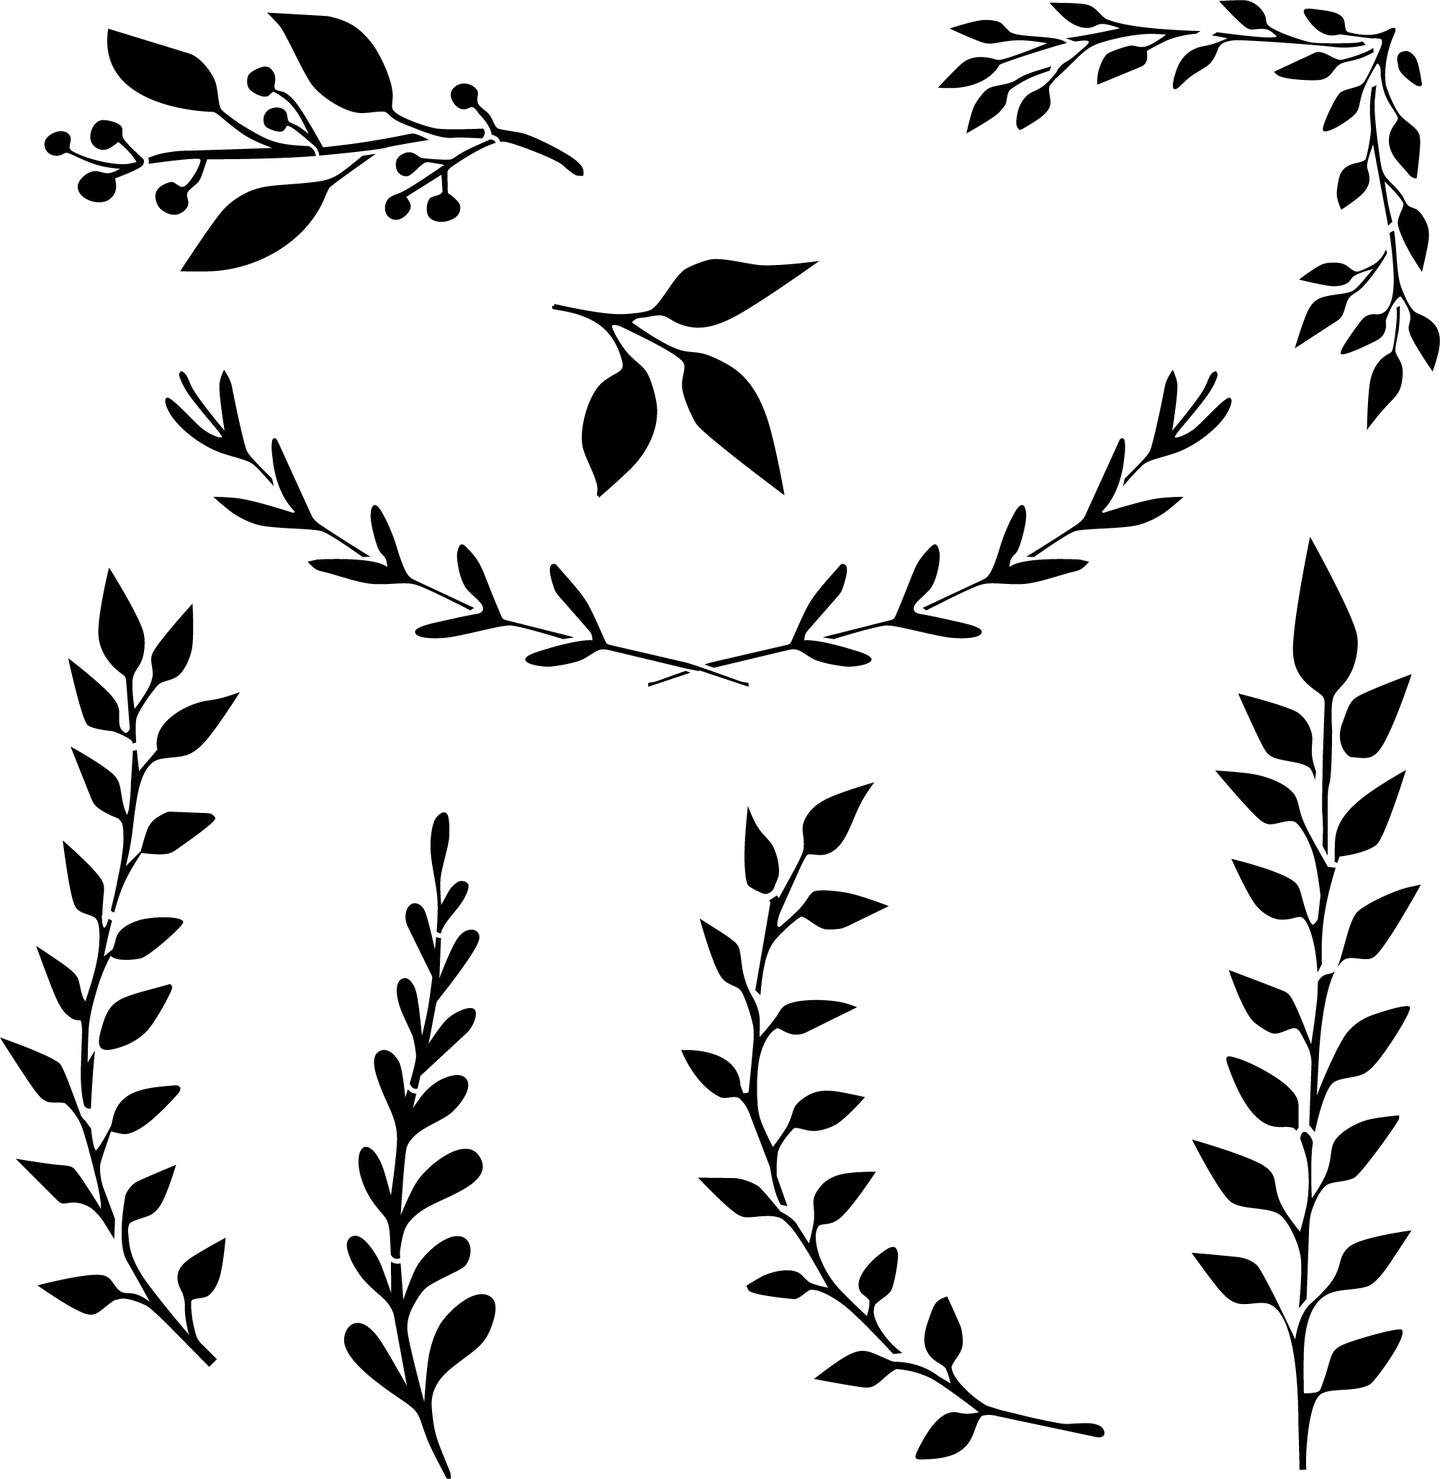 Sprigs and Branches Embossing 12 x 12 Stencil Details Set | FS052 by Designer Stencils | Floral Stencils | Reusable Stencils for Painting on Wood, Wall, Tile, Canvas, Paper, Fabric, Furniture, Floor | Reusable Stencil for Home Makeover